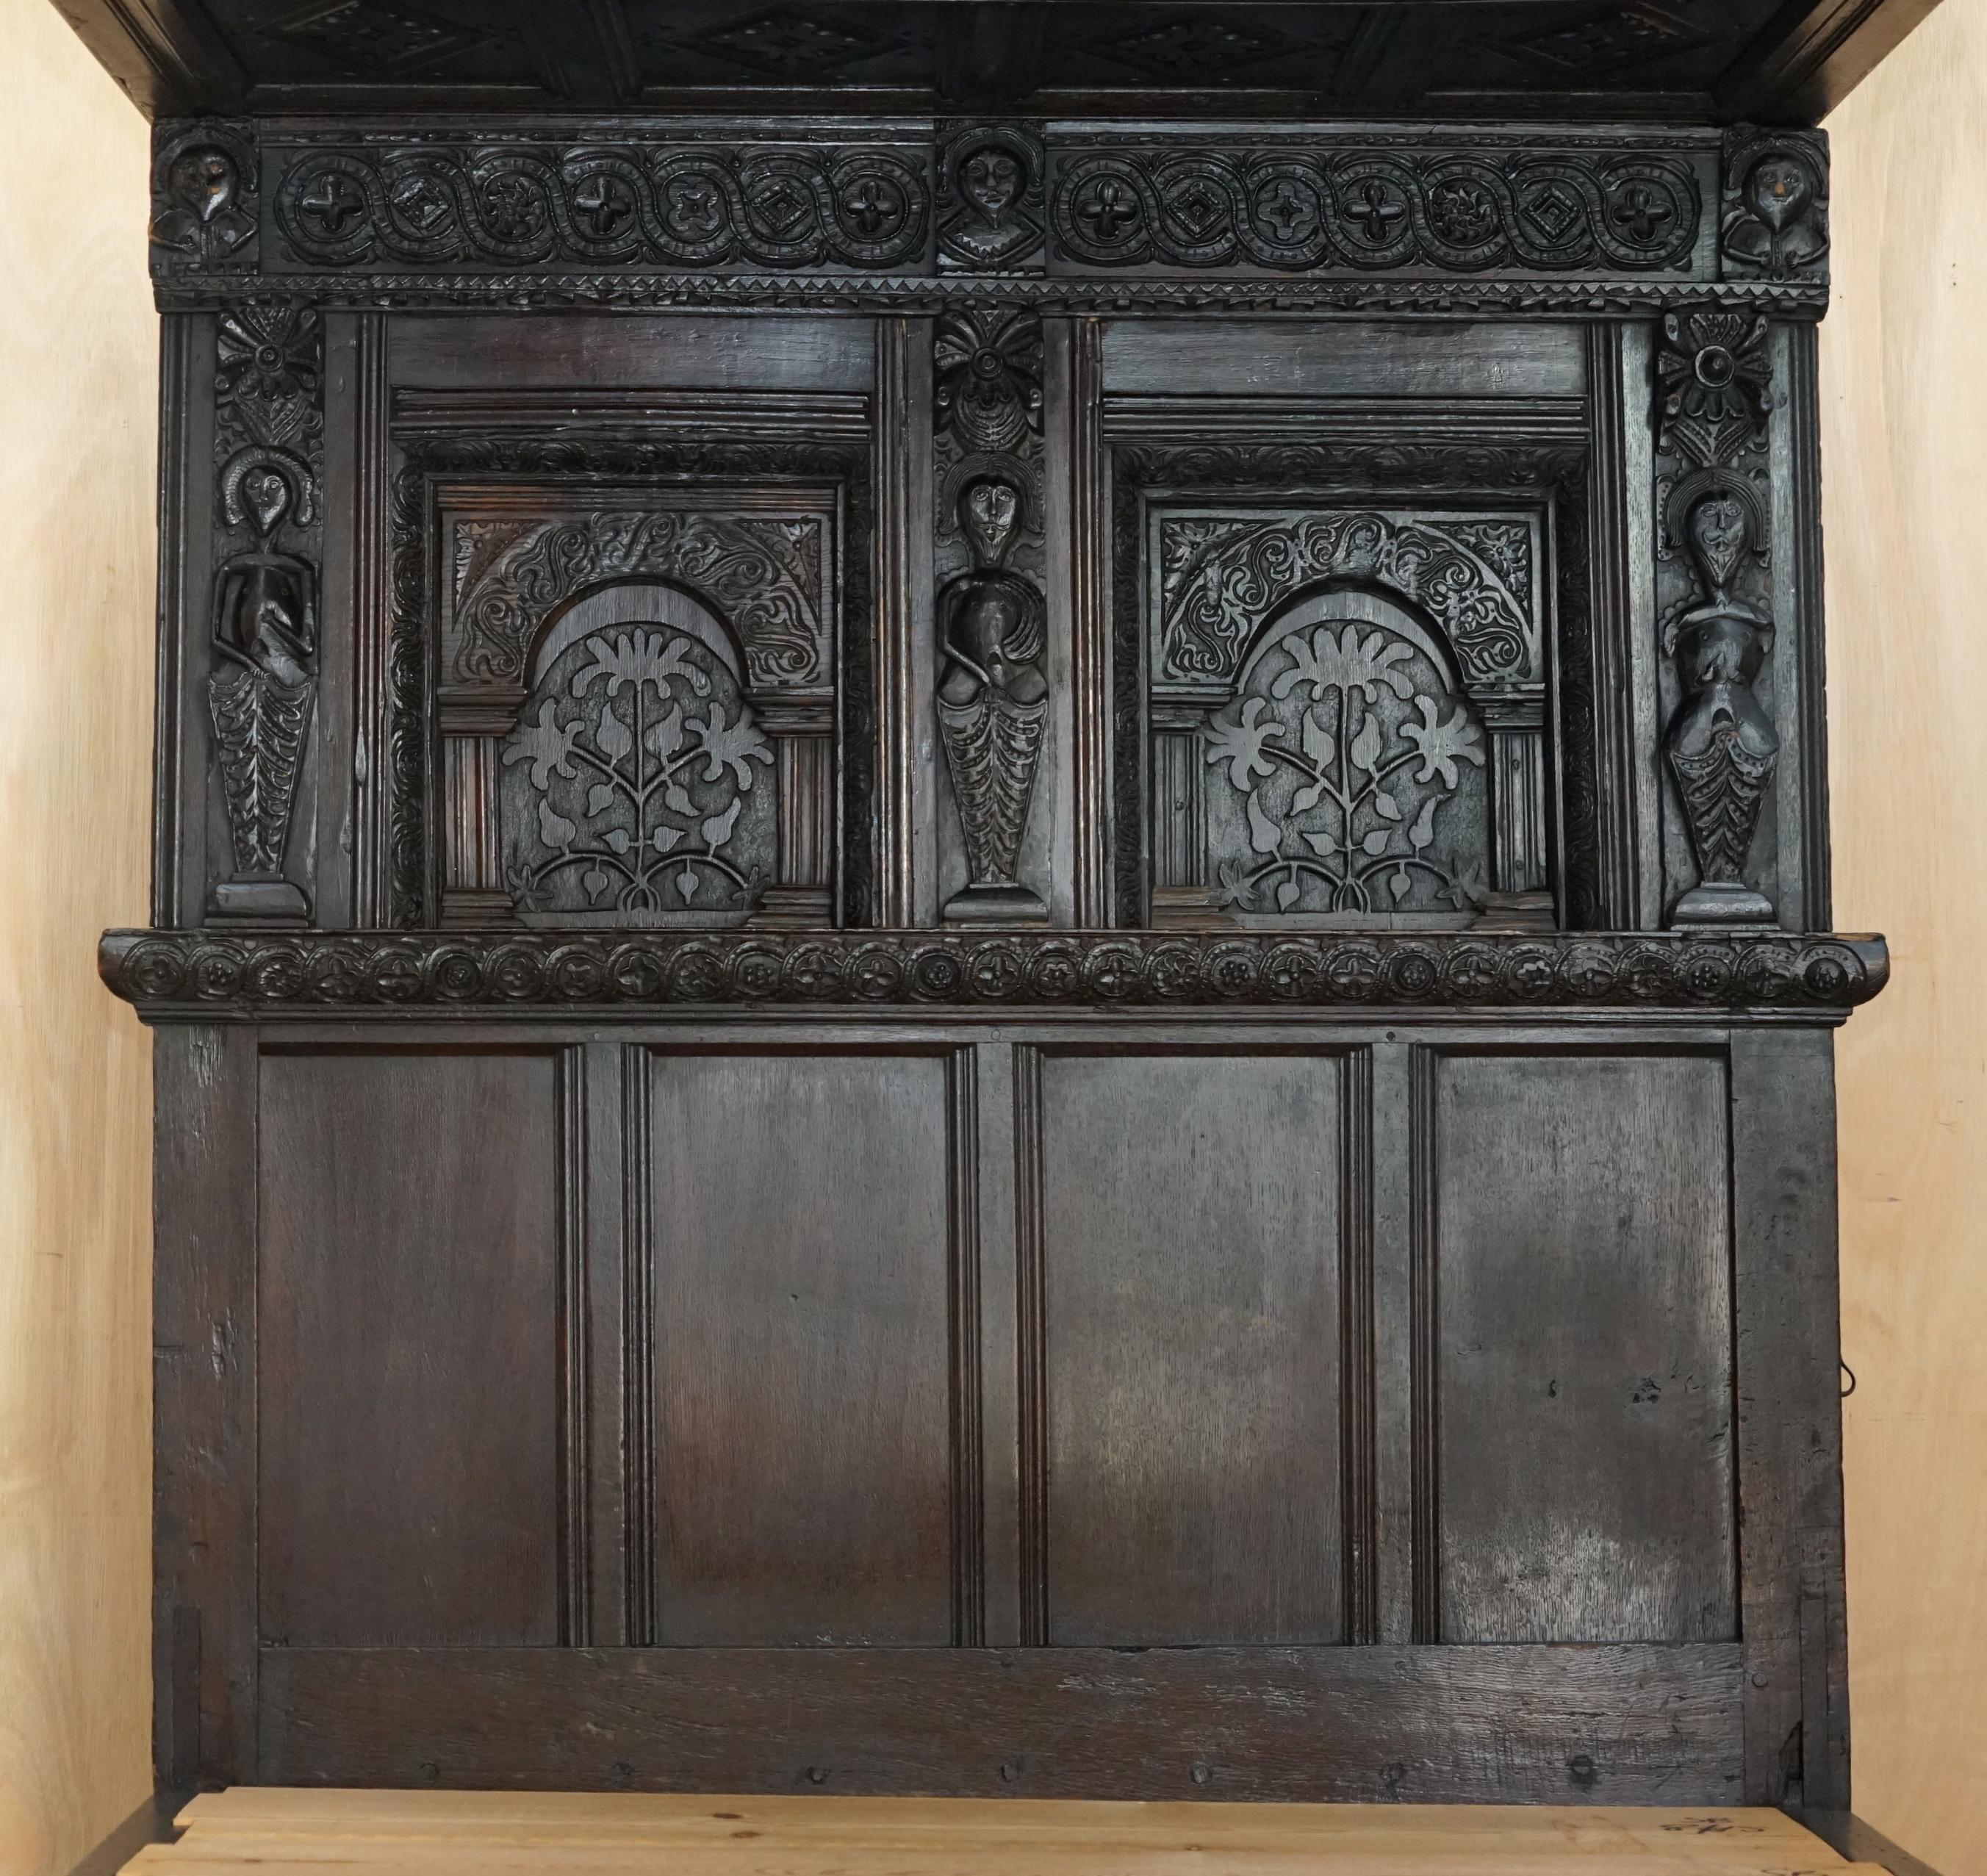 English 17TH CENTURY JACOBEAN WILLIAM III CIRCA 1650 ENGLiSH OAK TESTER FOUR POSTER BED For Sale